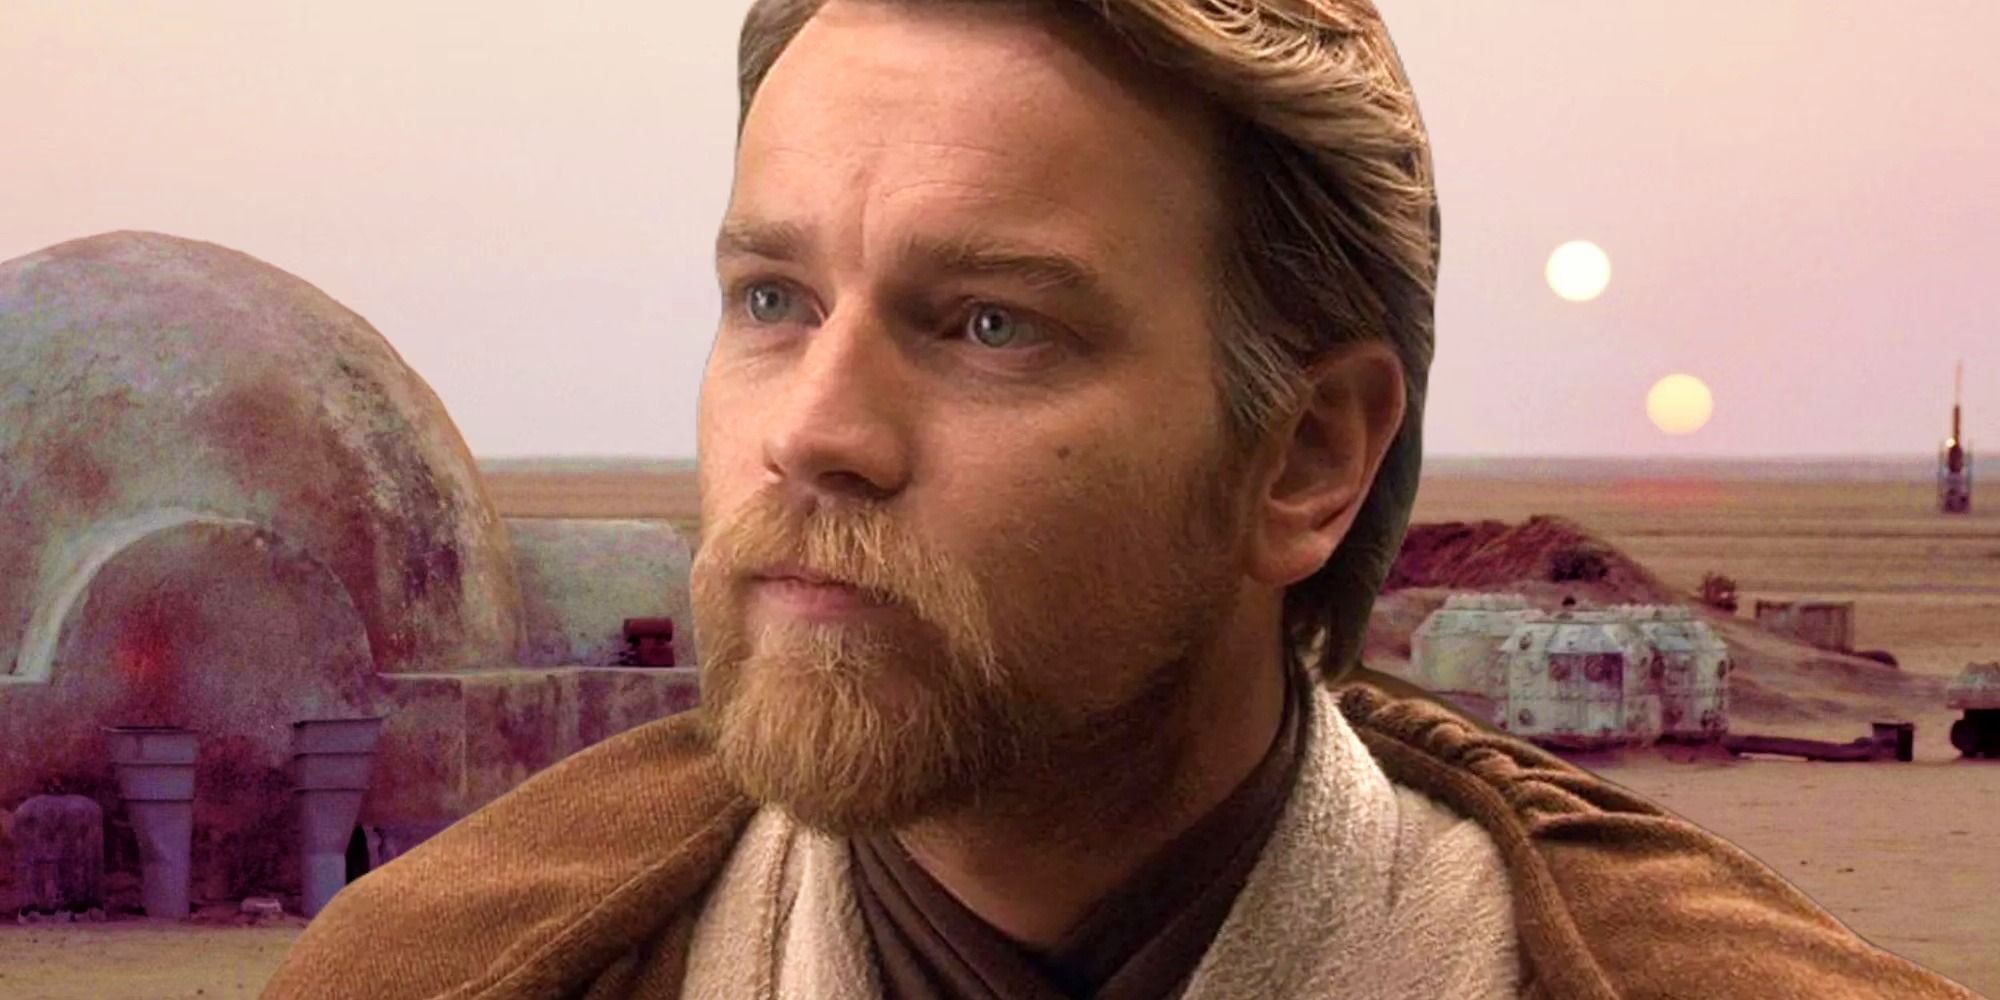 Obi-Wan from Revenge of the Sith in front of Tatooine from A New Hope